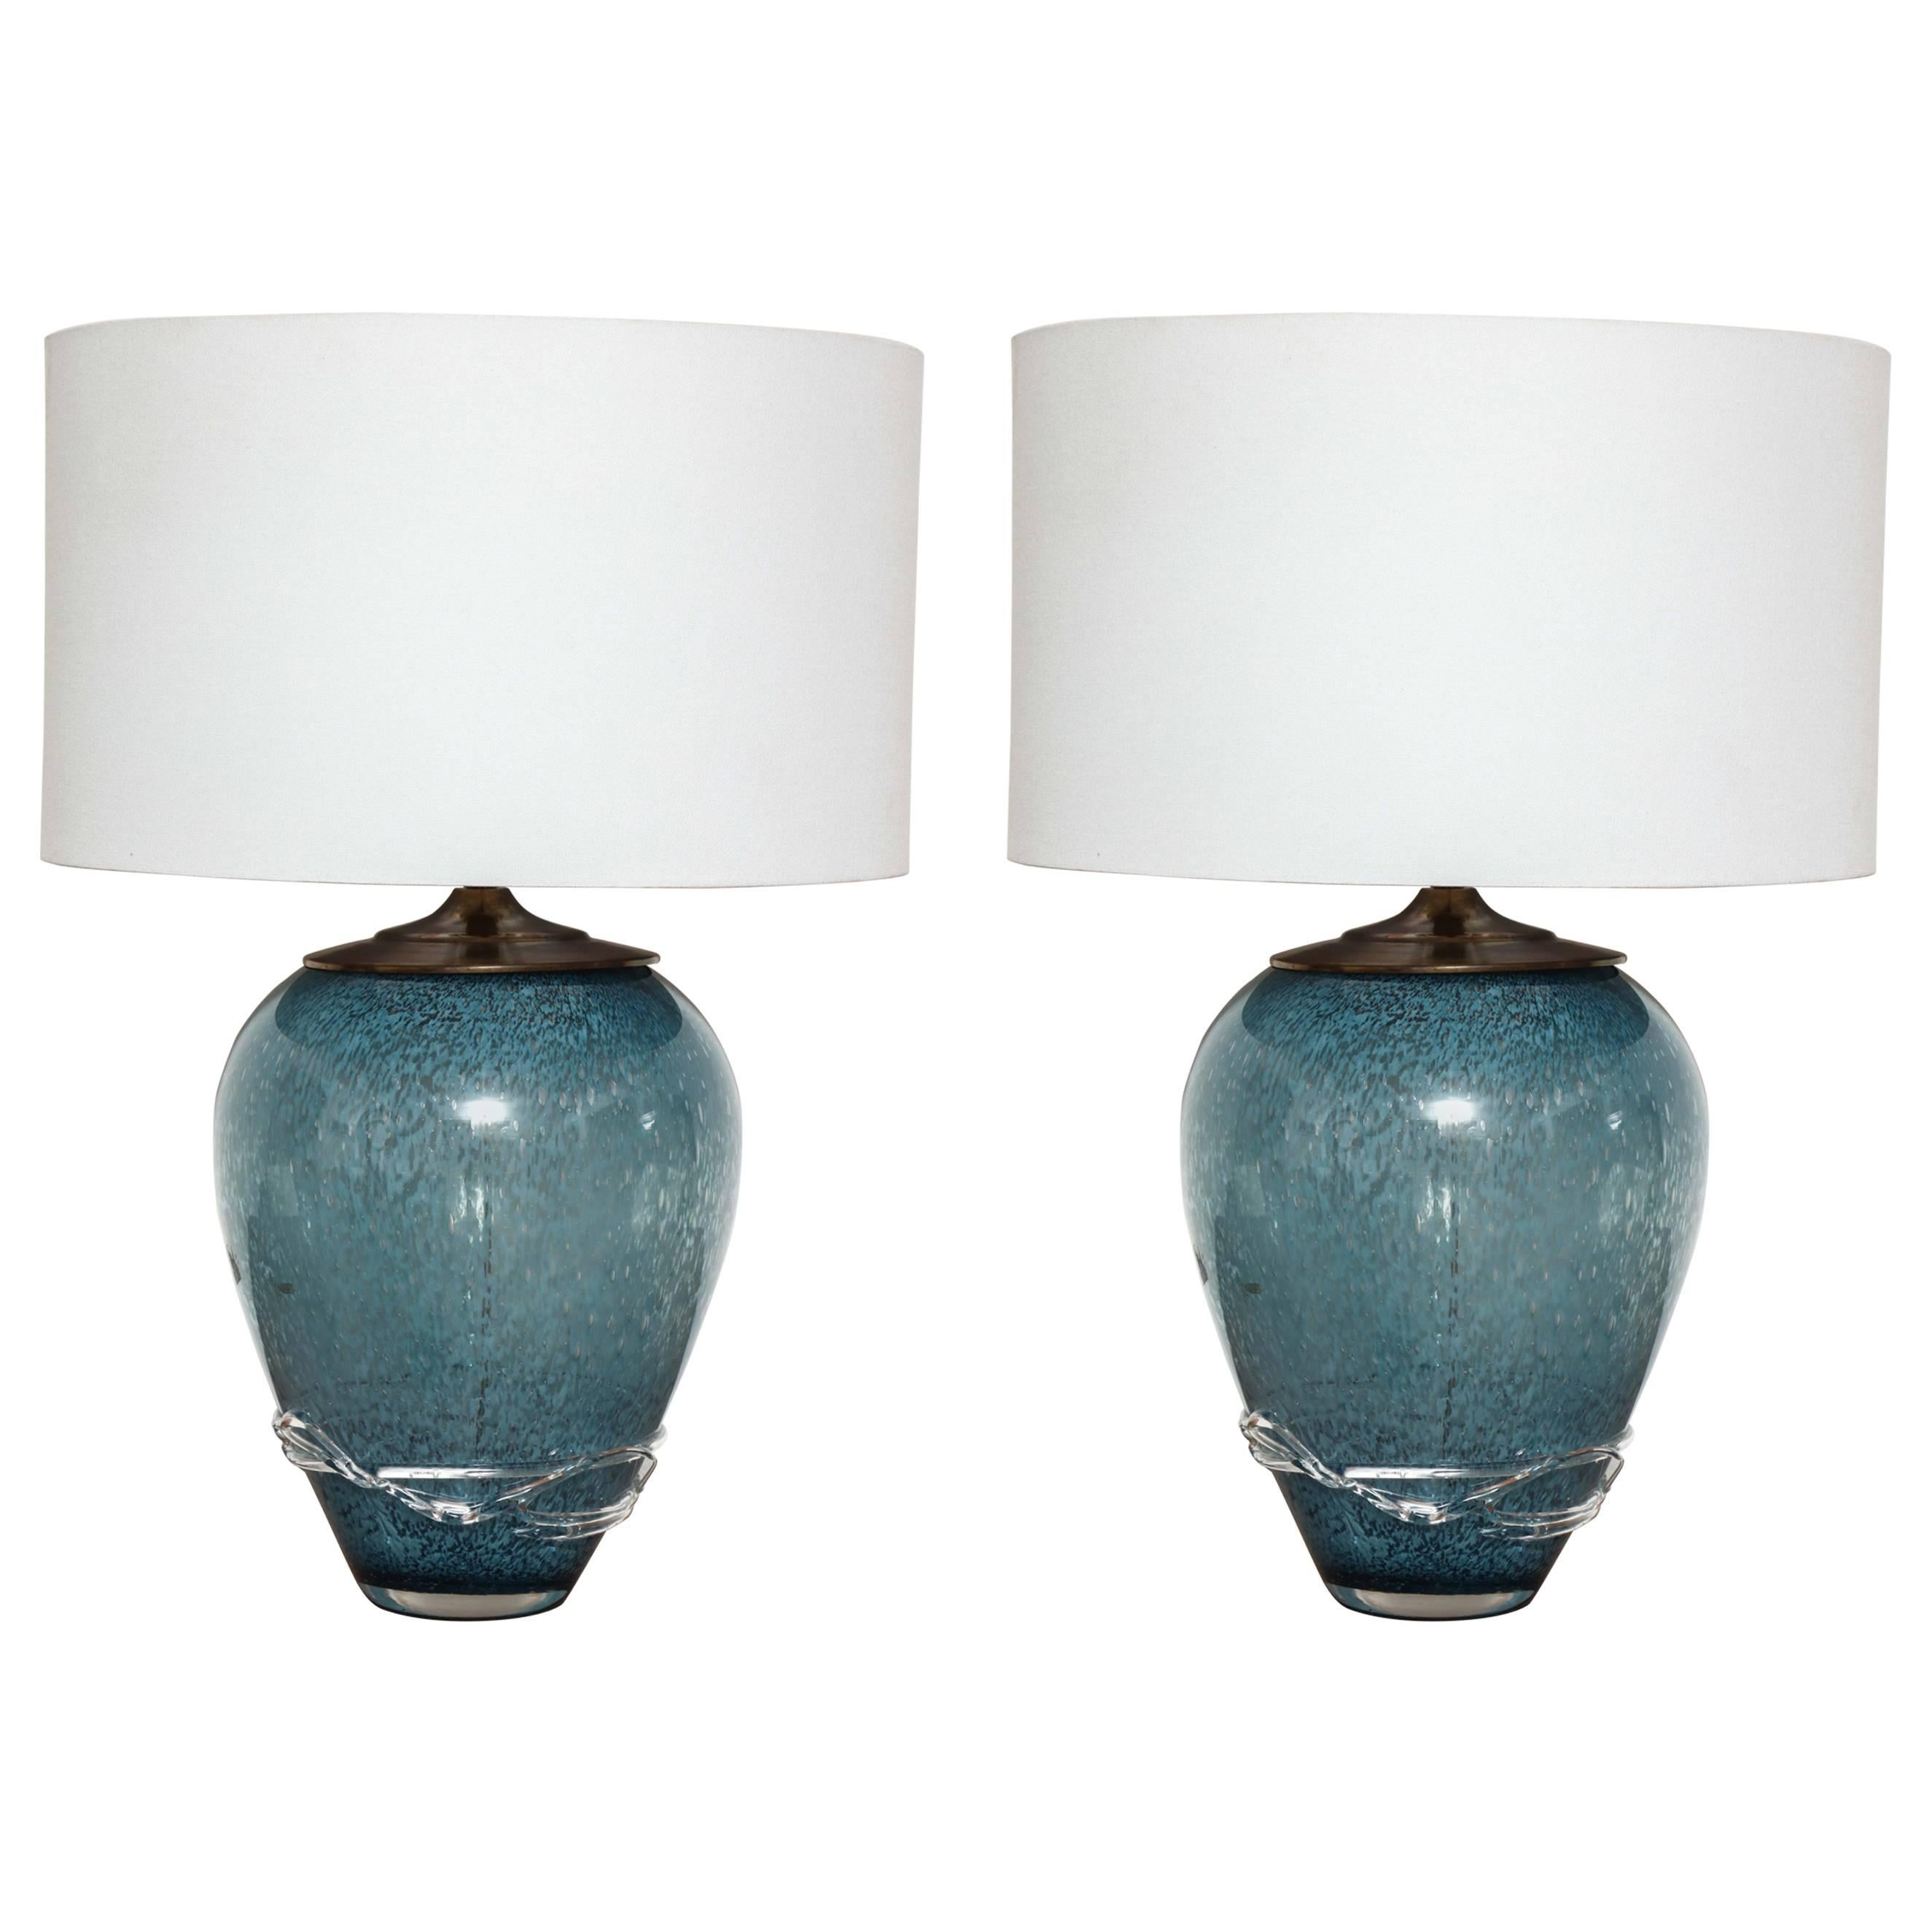 Wedgewood Blue Murano Table Lamps For Sale